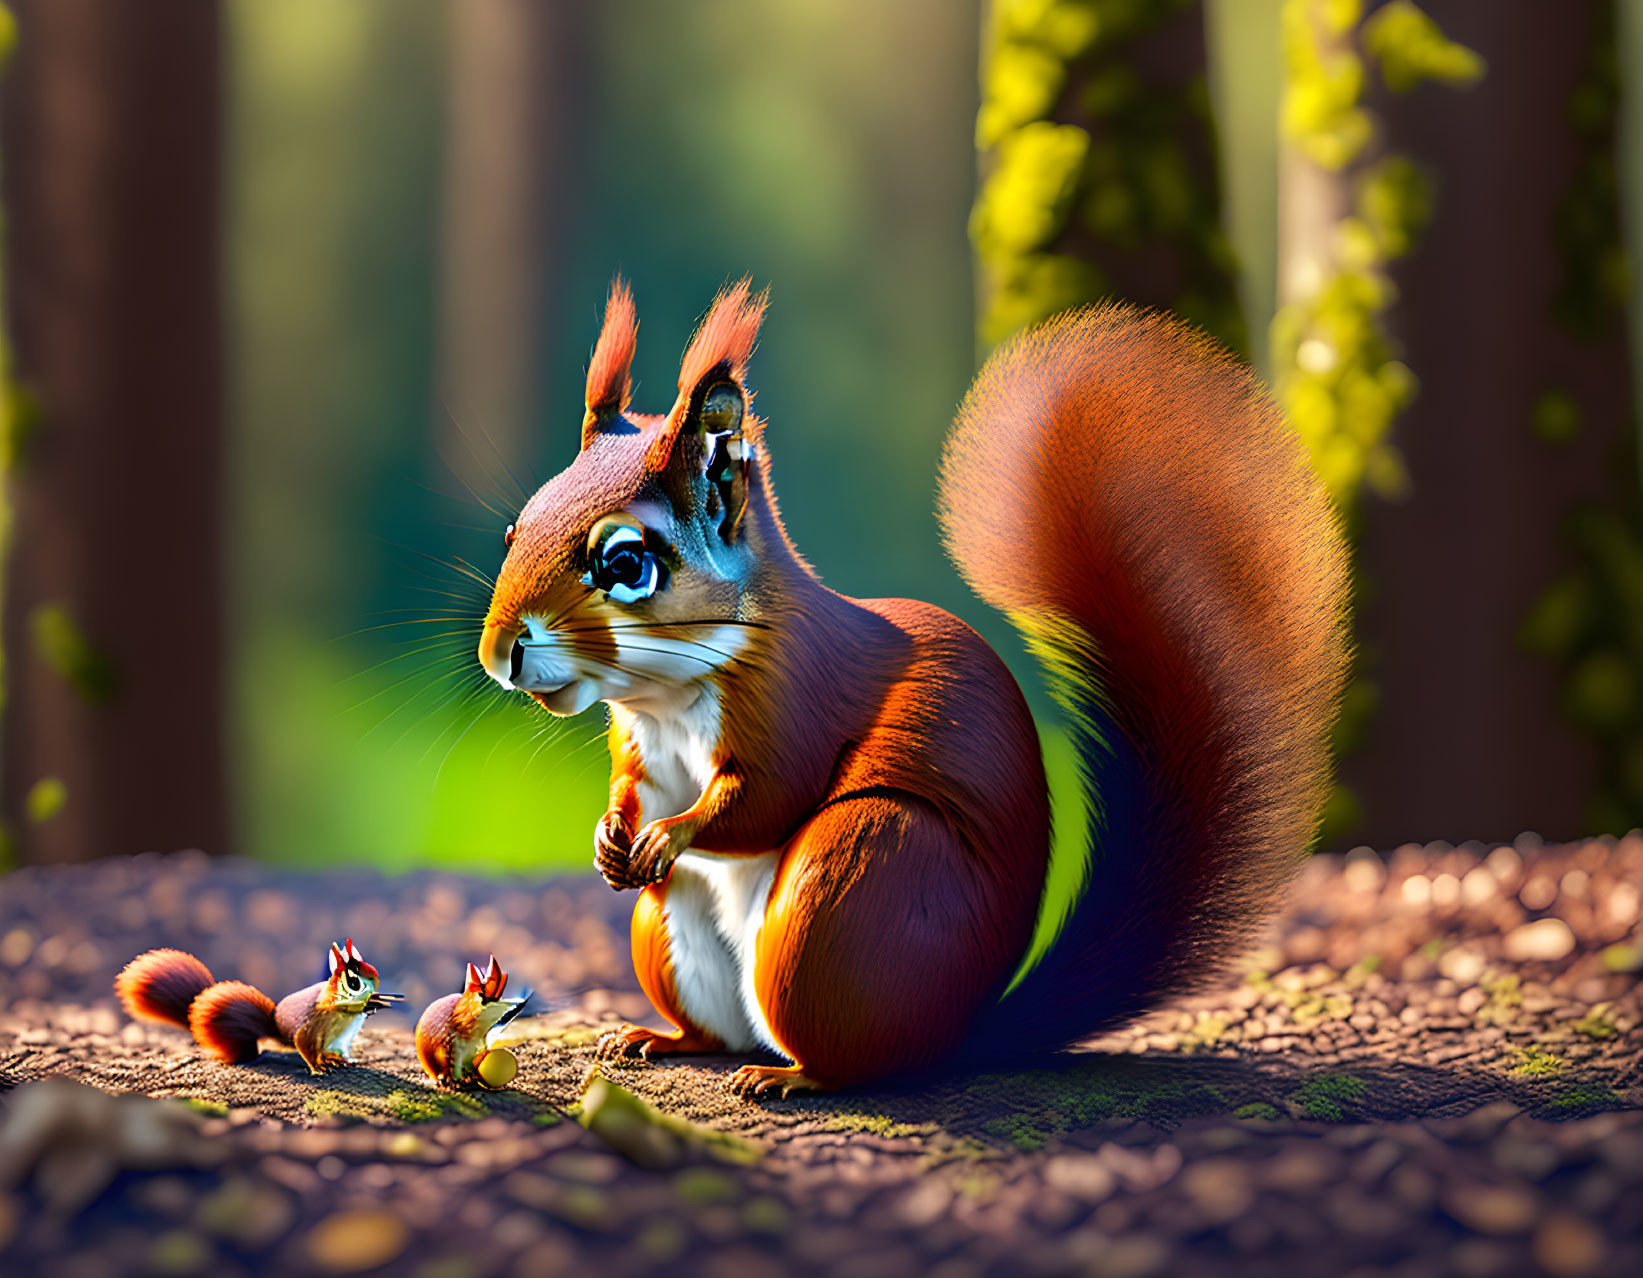 Colorful illustration of large and tiny squirrels in lush forest scenery